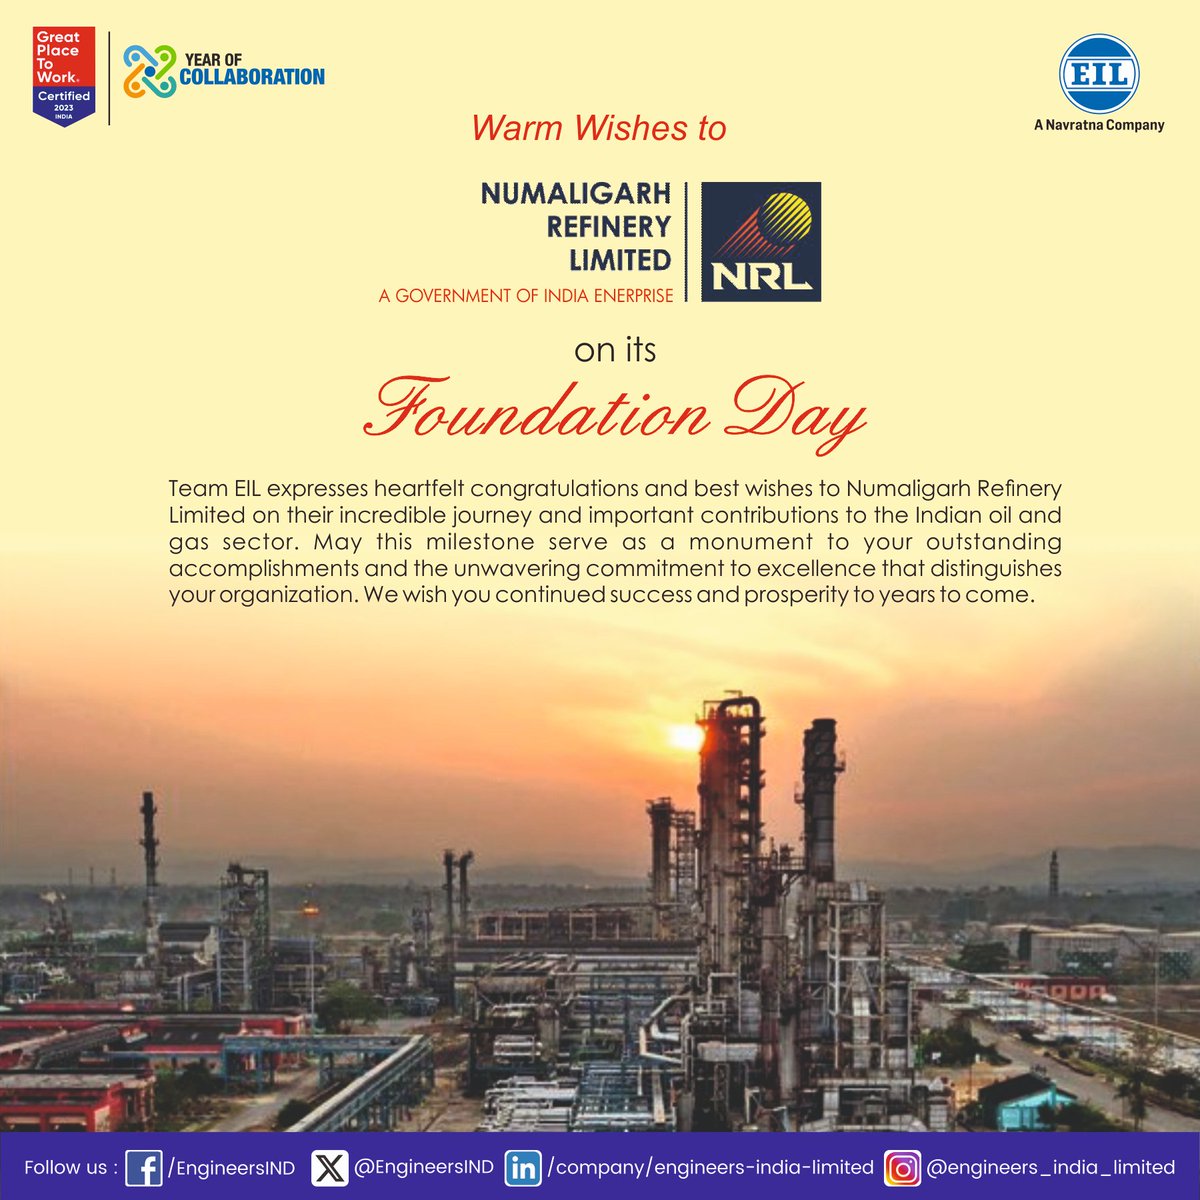 Team EIL extends its warm wishes to Team NRL on its Foundation Day. We wish them greater success in making India energy self-sufficient and in bringing progress and prosperity to the states in the North East @HardeepSPuri @Rameswar_Teli @Vartika15791157 #NRL #Petroleum #Refinery